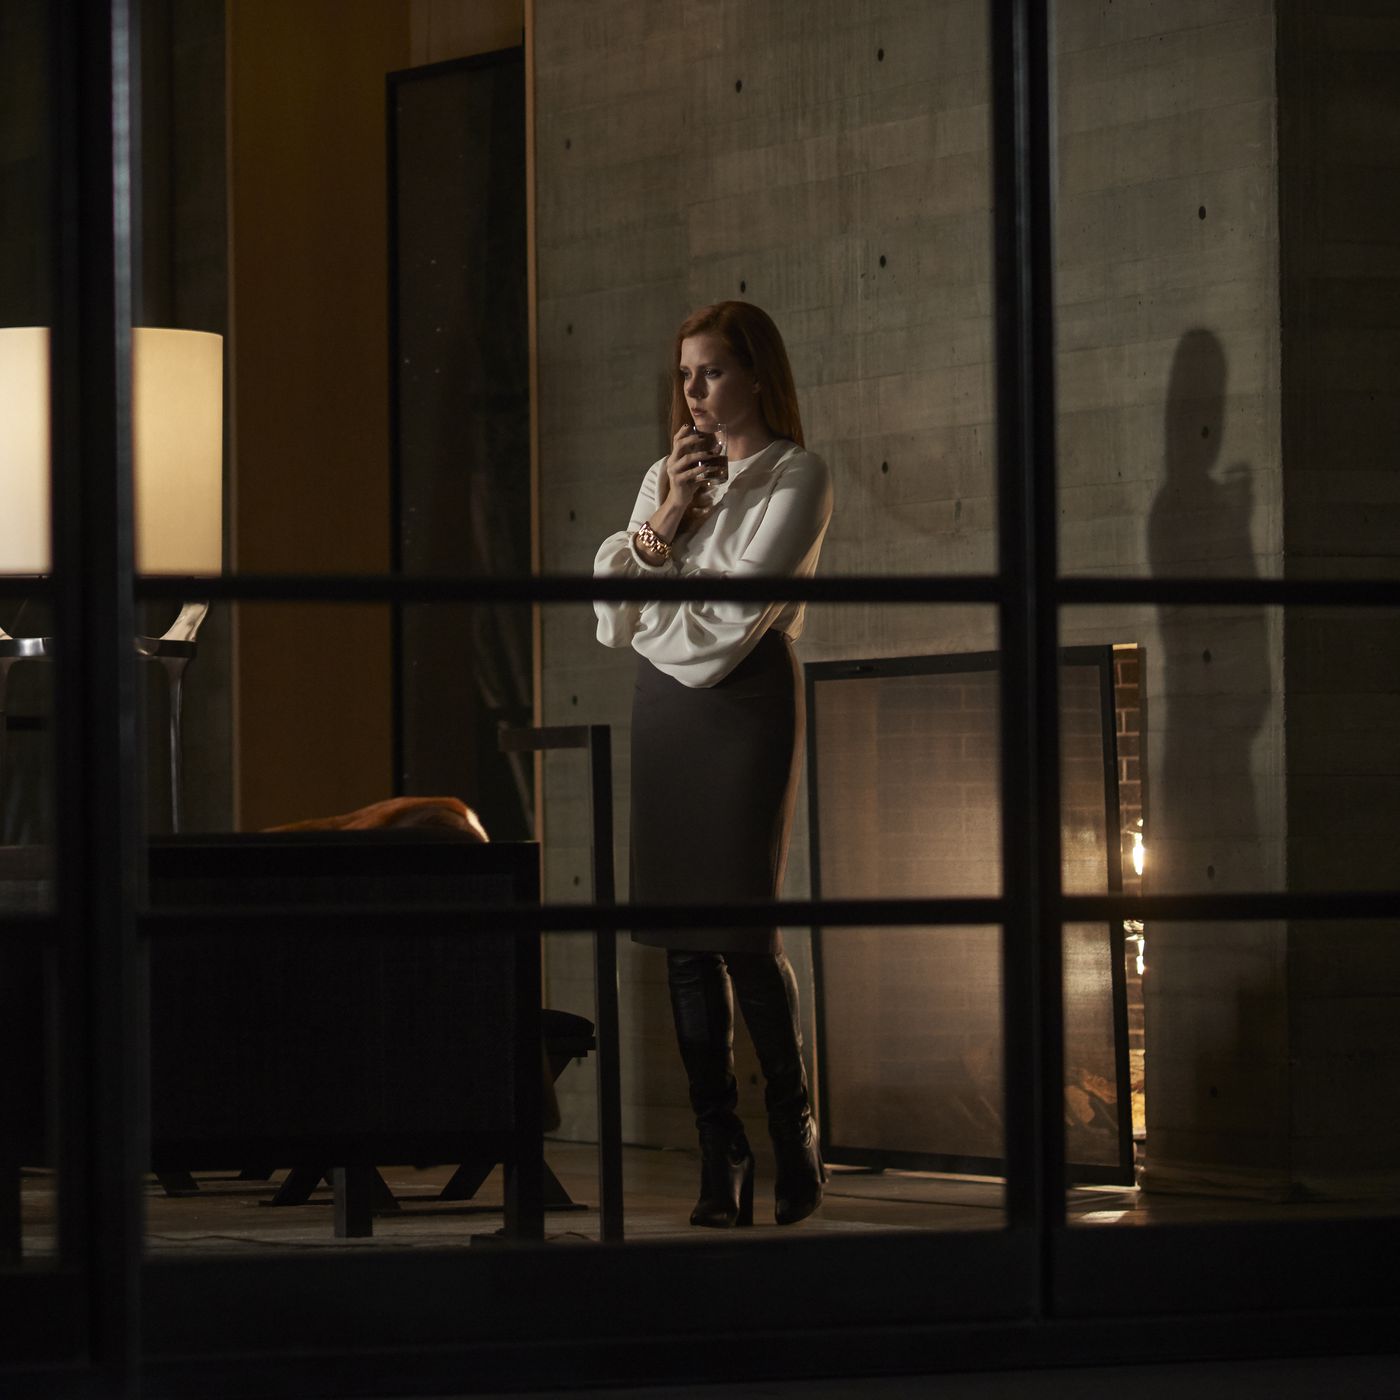 Nocturnal Animals is a stylish tale of psychological revenge through art -  Vox